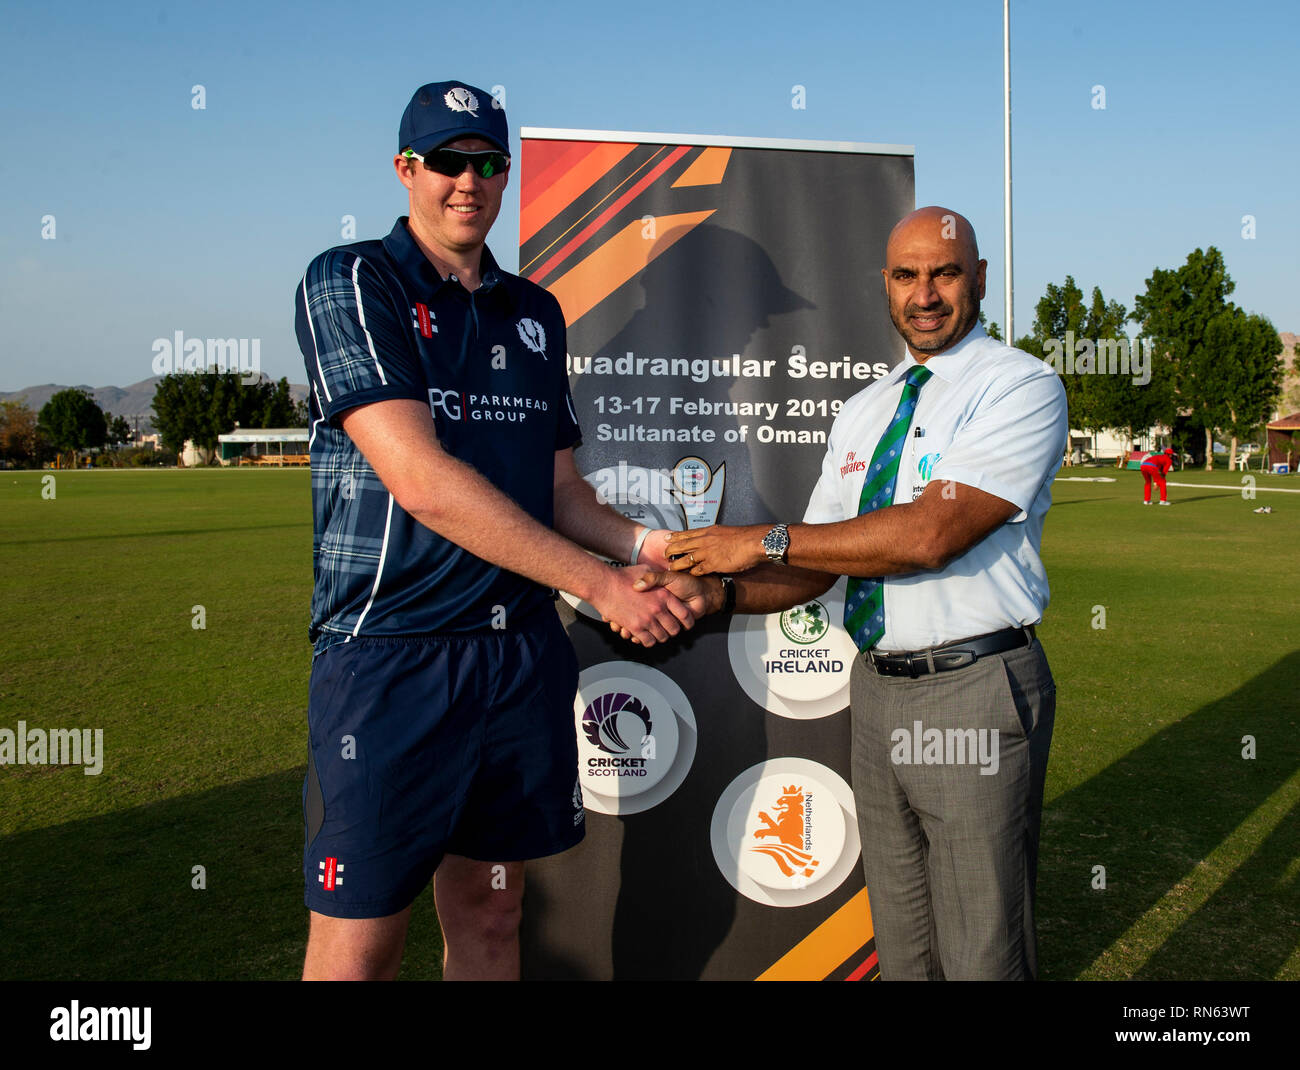 Muscat, Oman. 17, February, 2019. Pic shows: Not only did Adrian Neill make is debut for his country but was also presented with the player of the match award by Match referee, former Sri Lankan international cricketer, Mr Graeme Labrooy, as Scotland beat Oman by 7 wickets on the third day of the Oman Quadrangular Series.   Credit: Ian Jacobs Credit: Ian Jacobs/Alamy Live News Stock Photo